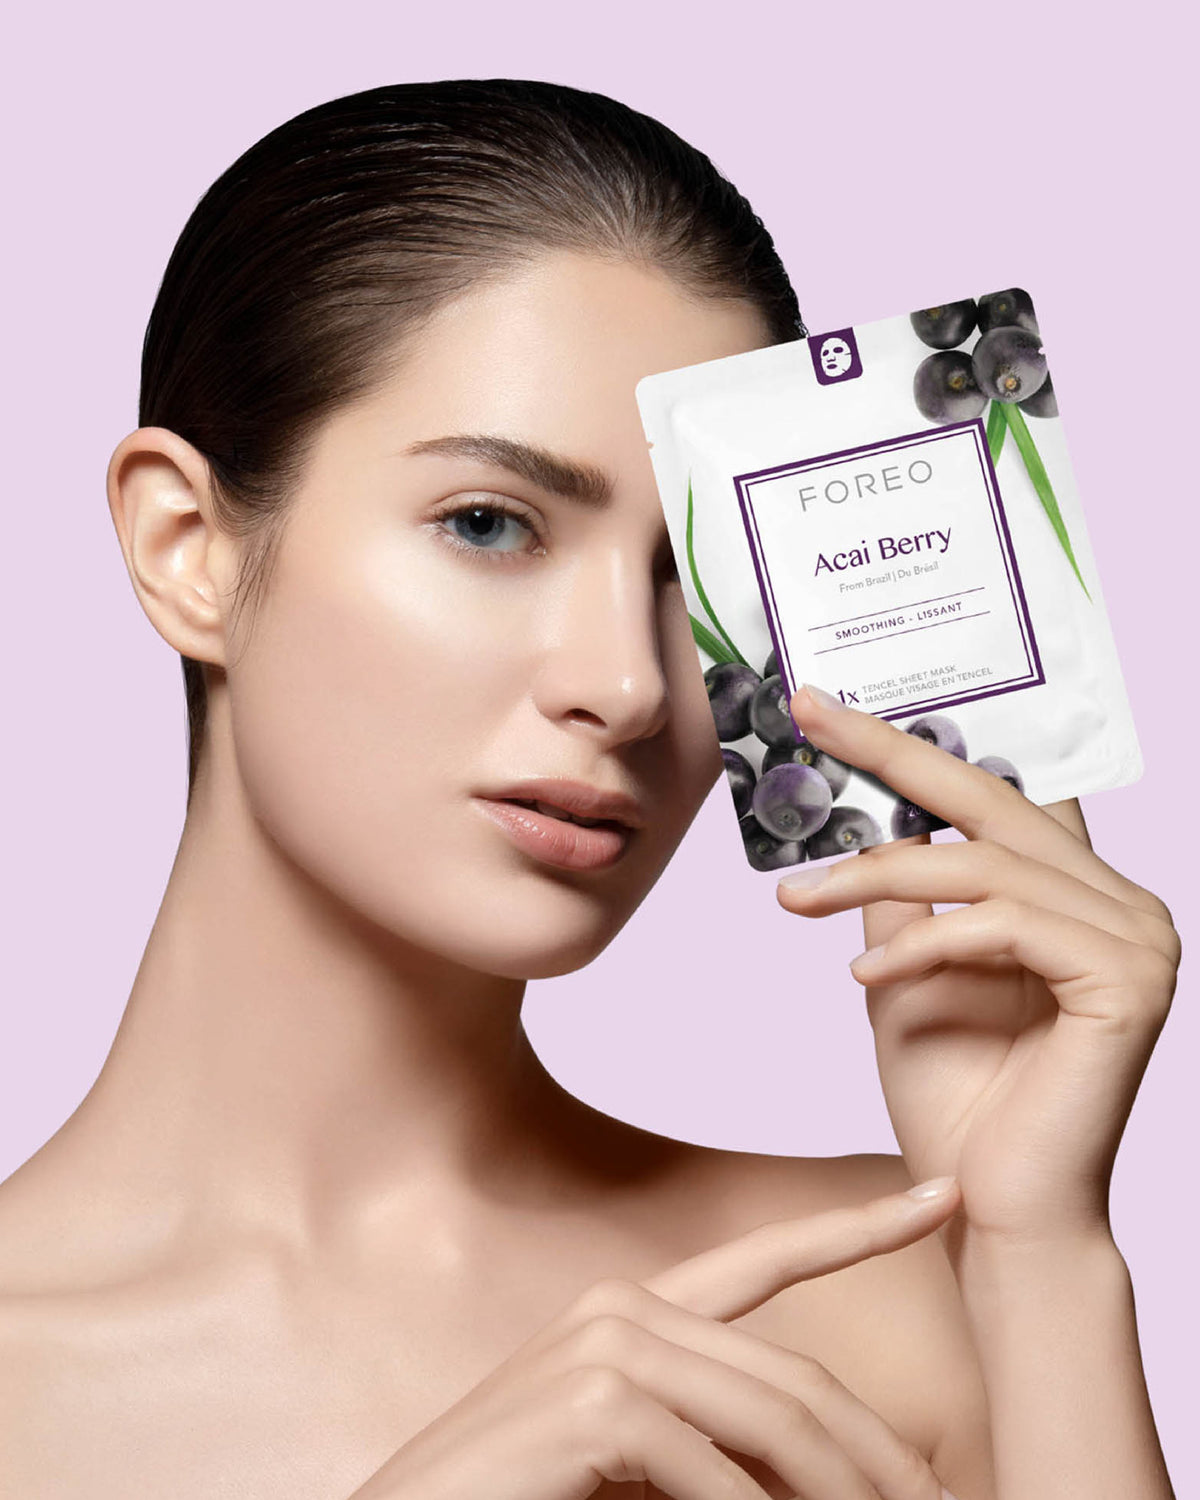 Acai Berry Firming Sheet Face Mask For Ageing Skin